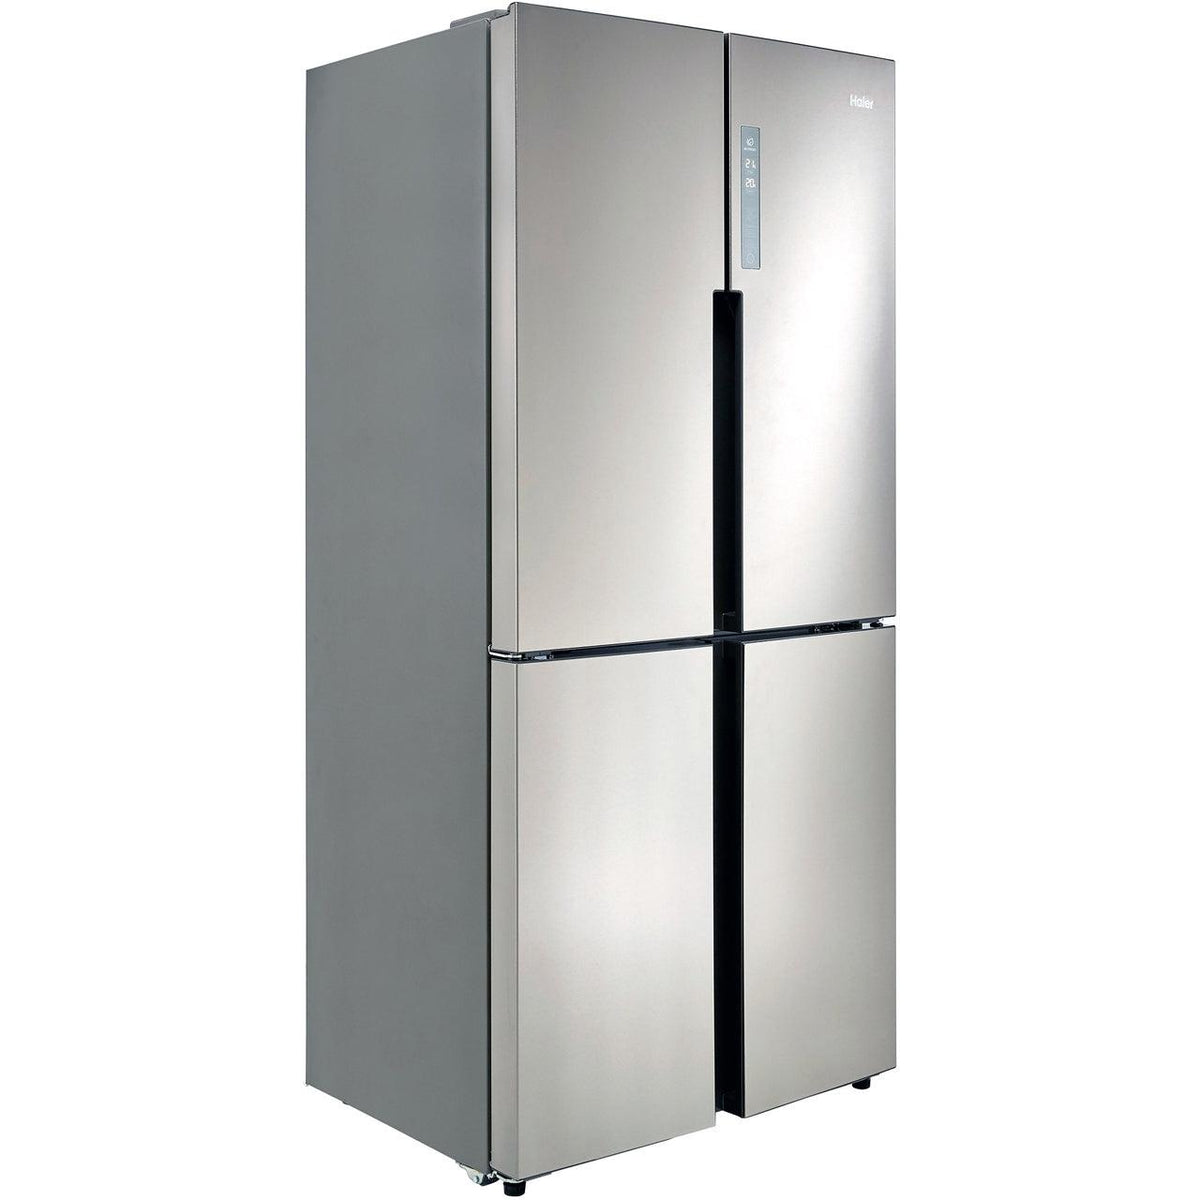 Haier Frost Free Freestanding American Fridge Freezer - Stainless Steel | HTF-556DP6 from DID Electrical - guaranteed Irish, guaranteed quality service. (6890834067644)